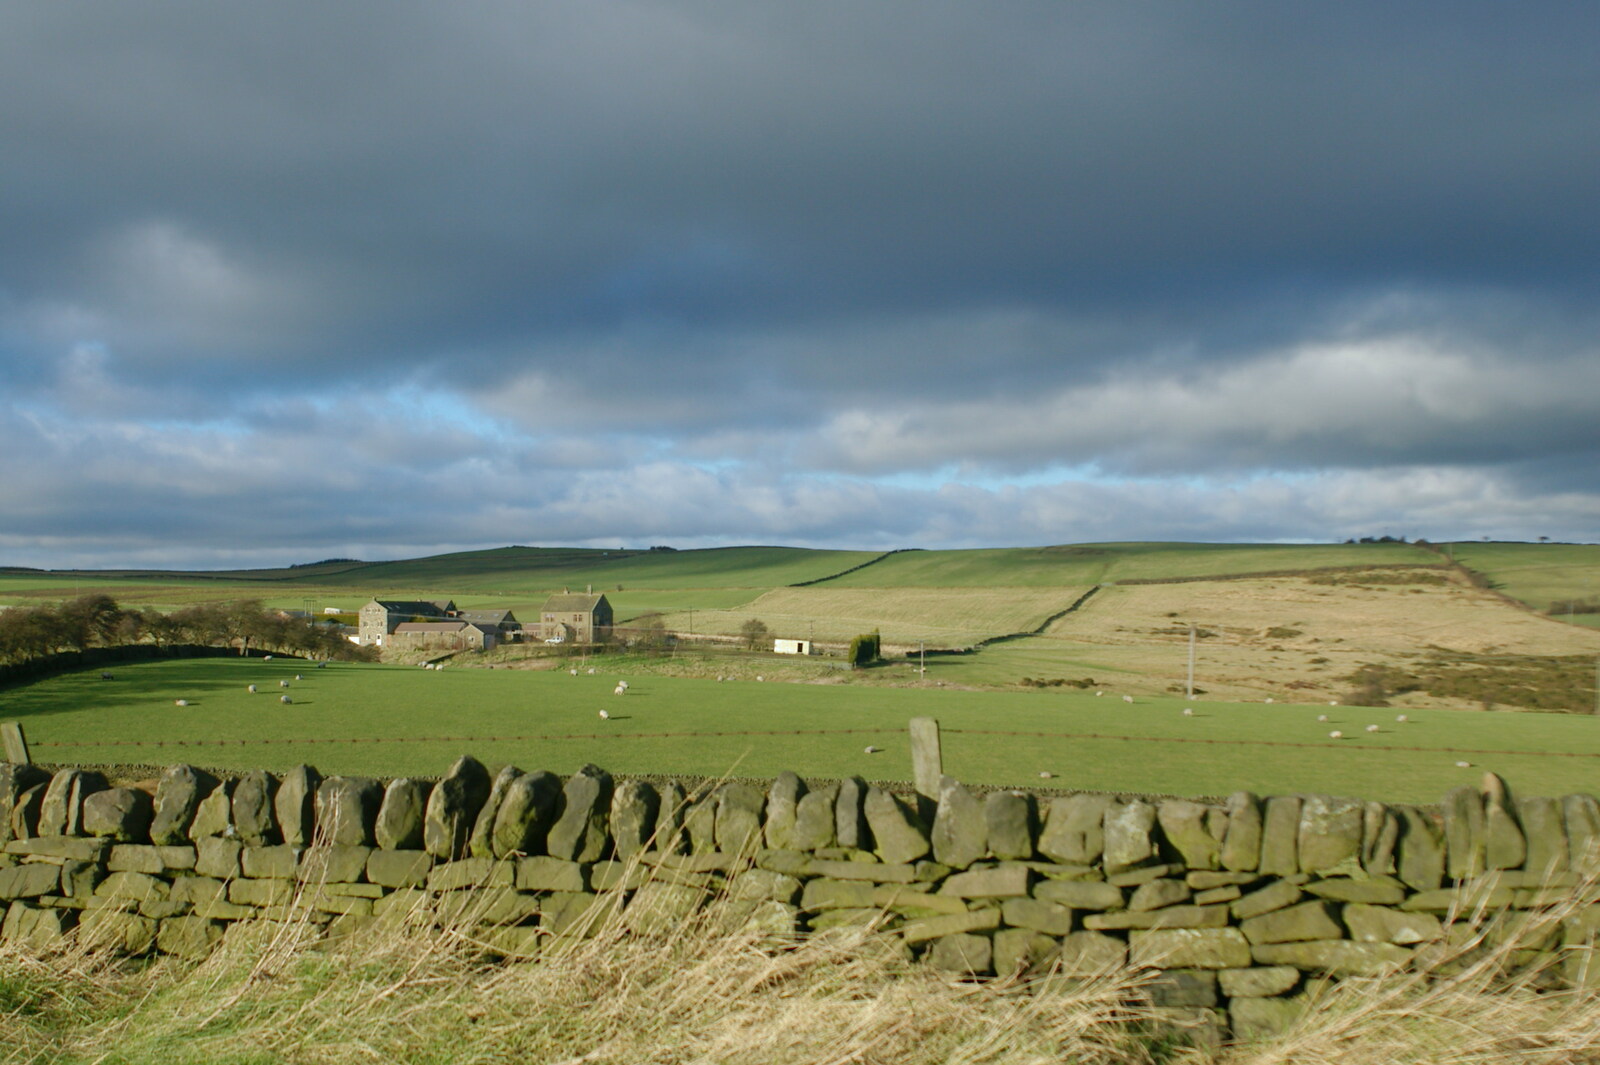 Driving Around Oop North, Hoylandswain, West Yorkshire - 30th January 2005: Another dry stone wall